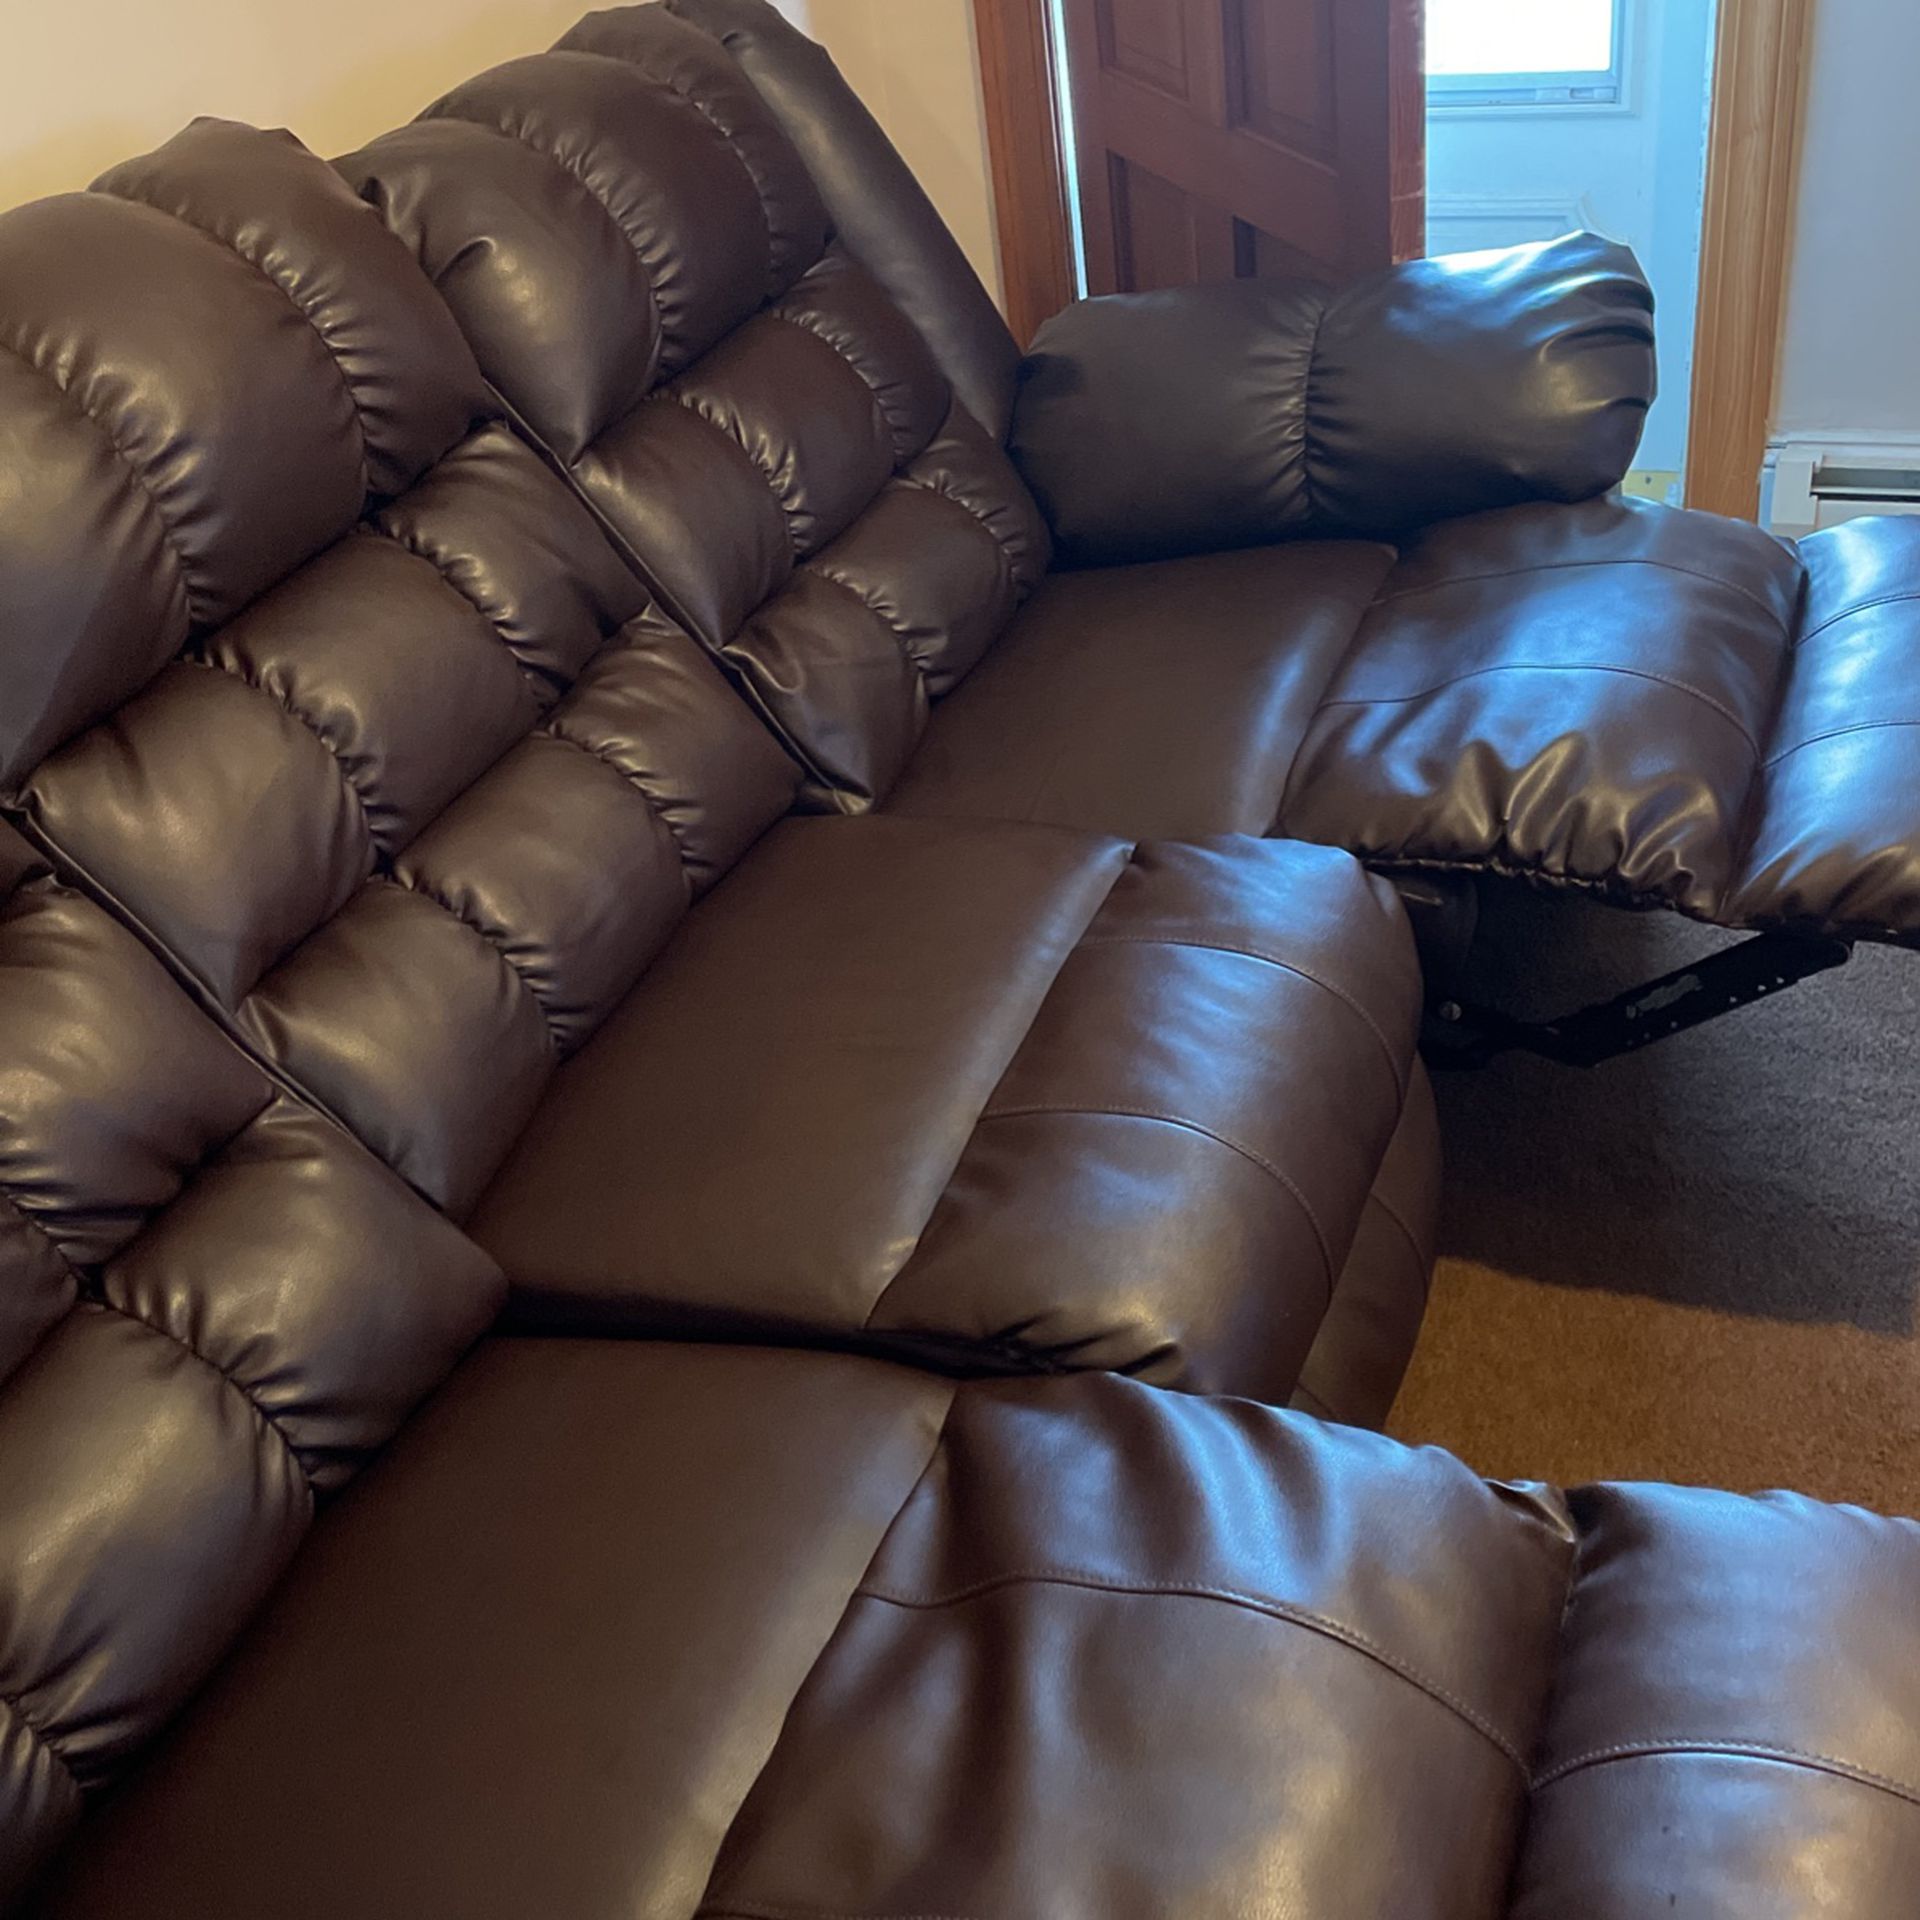 Recliner Leather Couch